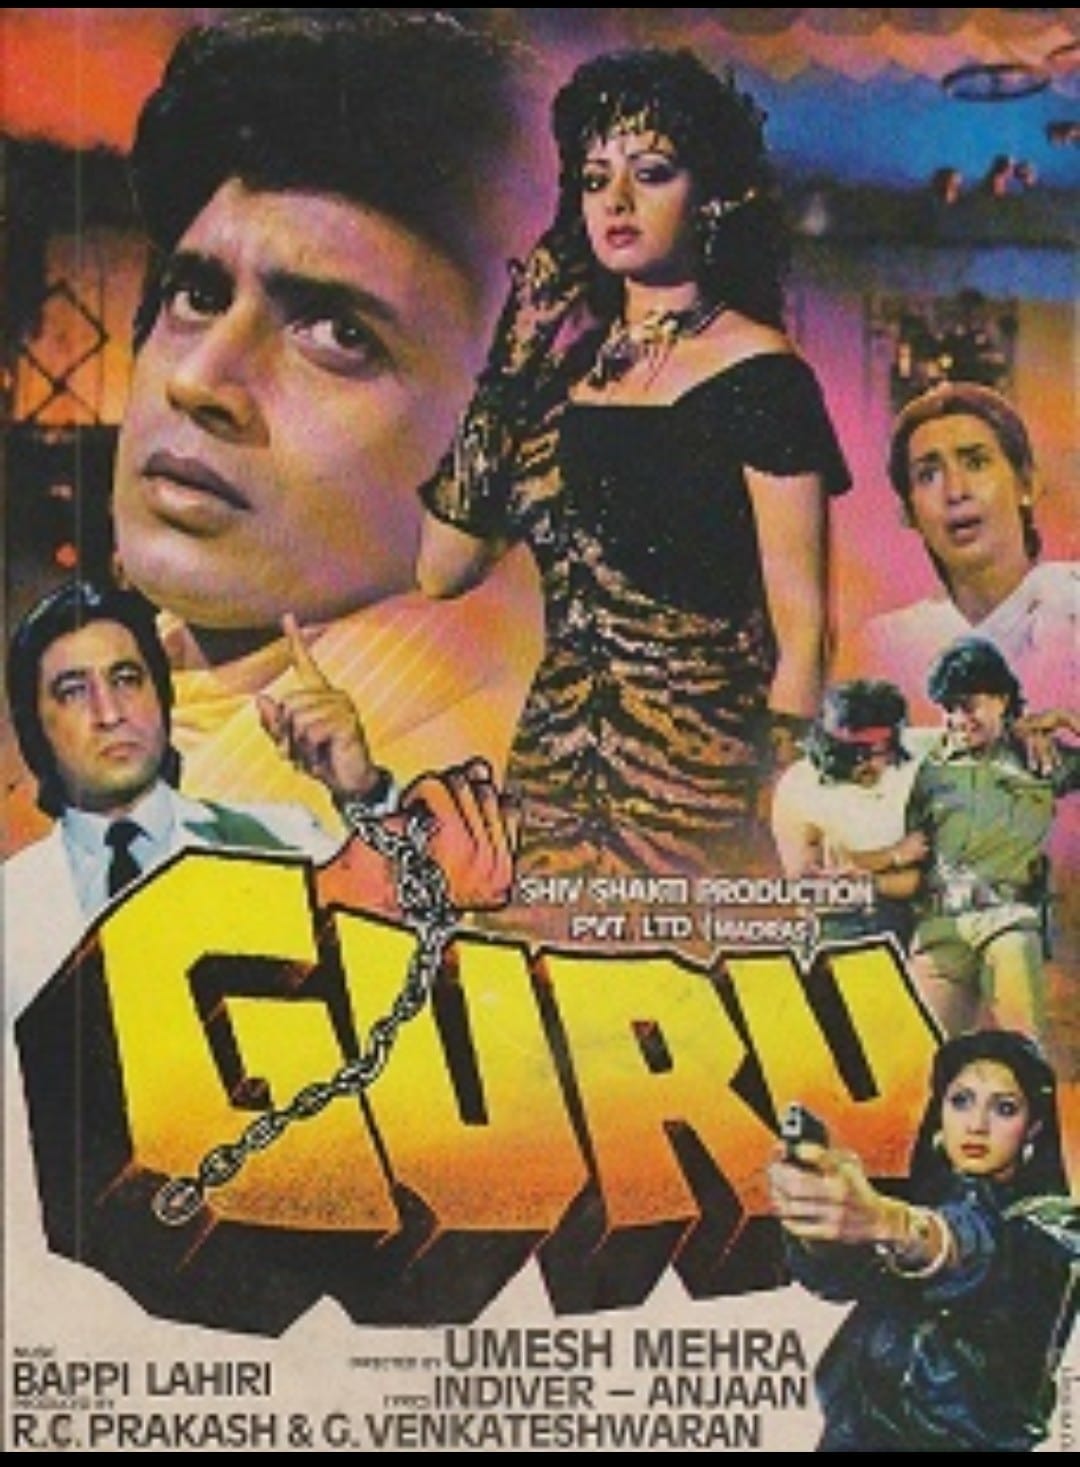 Poster for the movie "Guru"